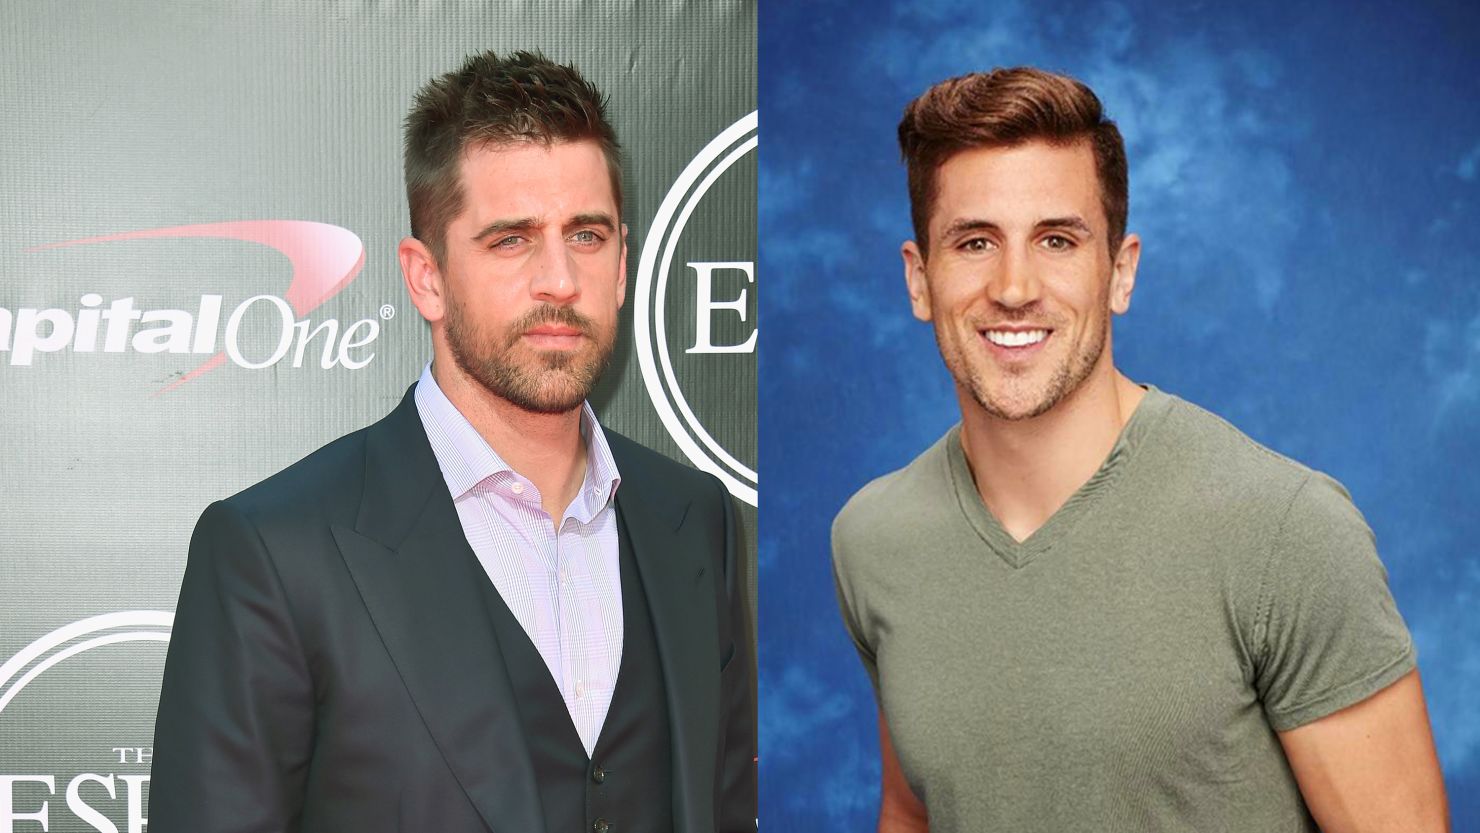 Quarterback Aaron Rodgers, left, says he's not watching his brother Jordan on "The Bachelorette."